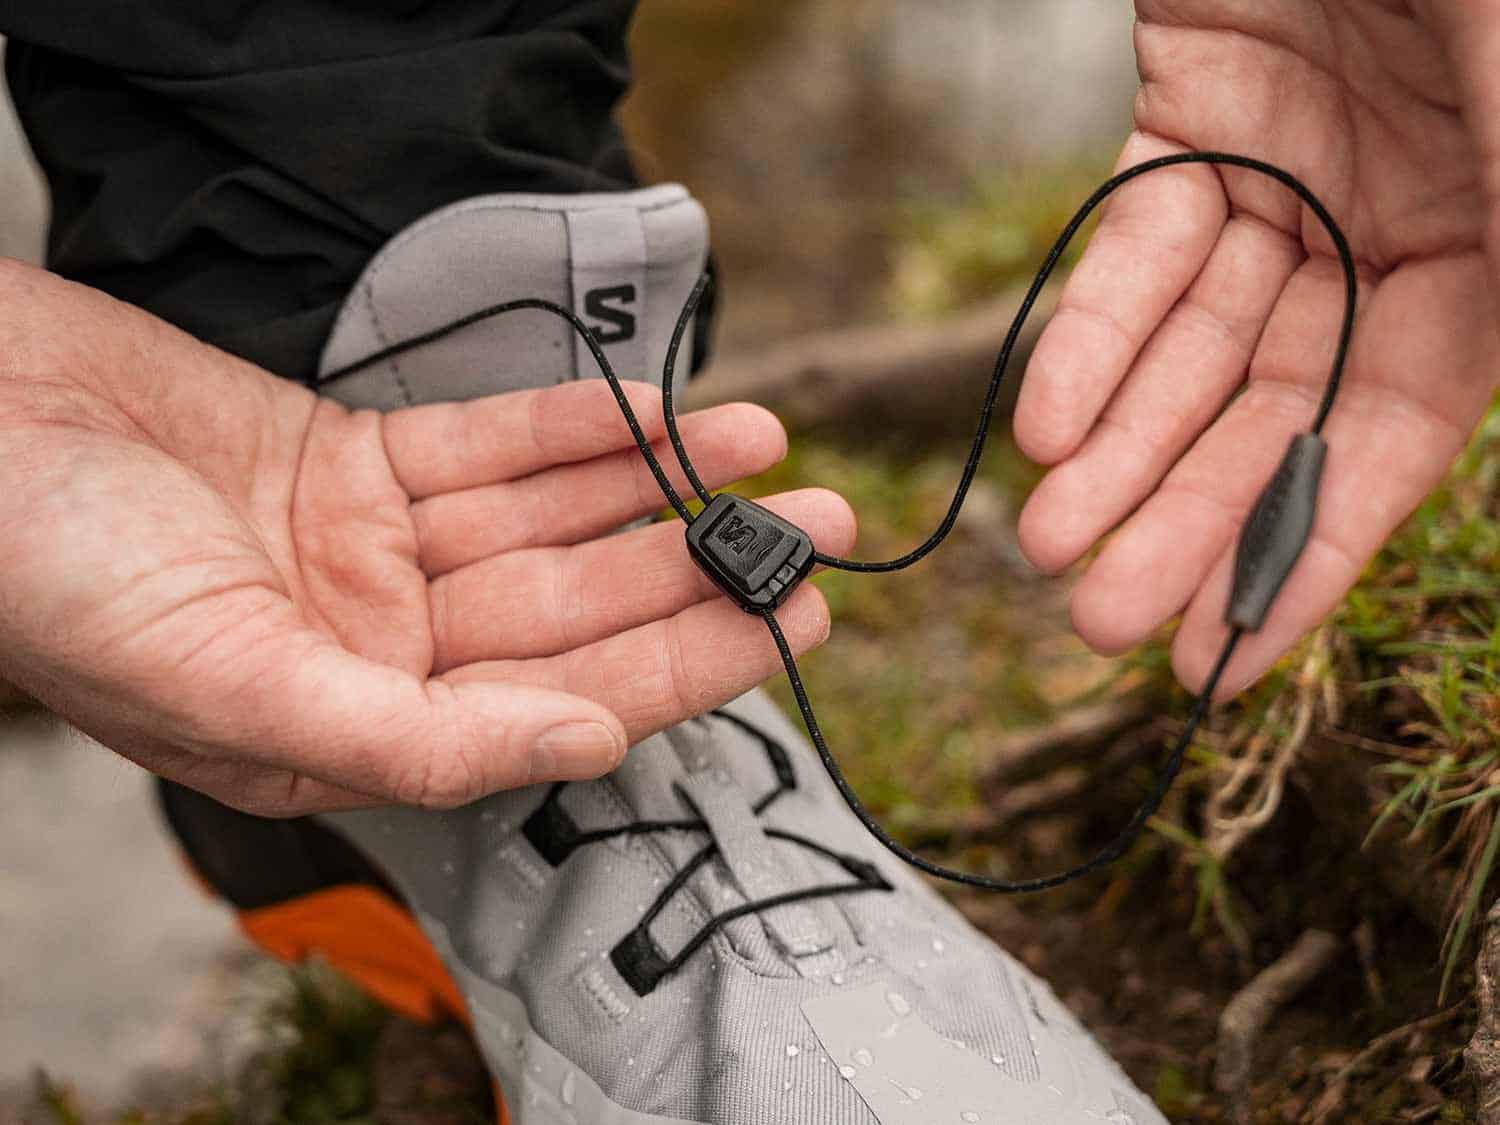 Is there a good hiking shoe similar to Salomon's quick lace system? - Quora